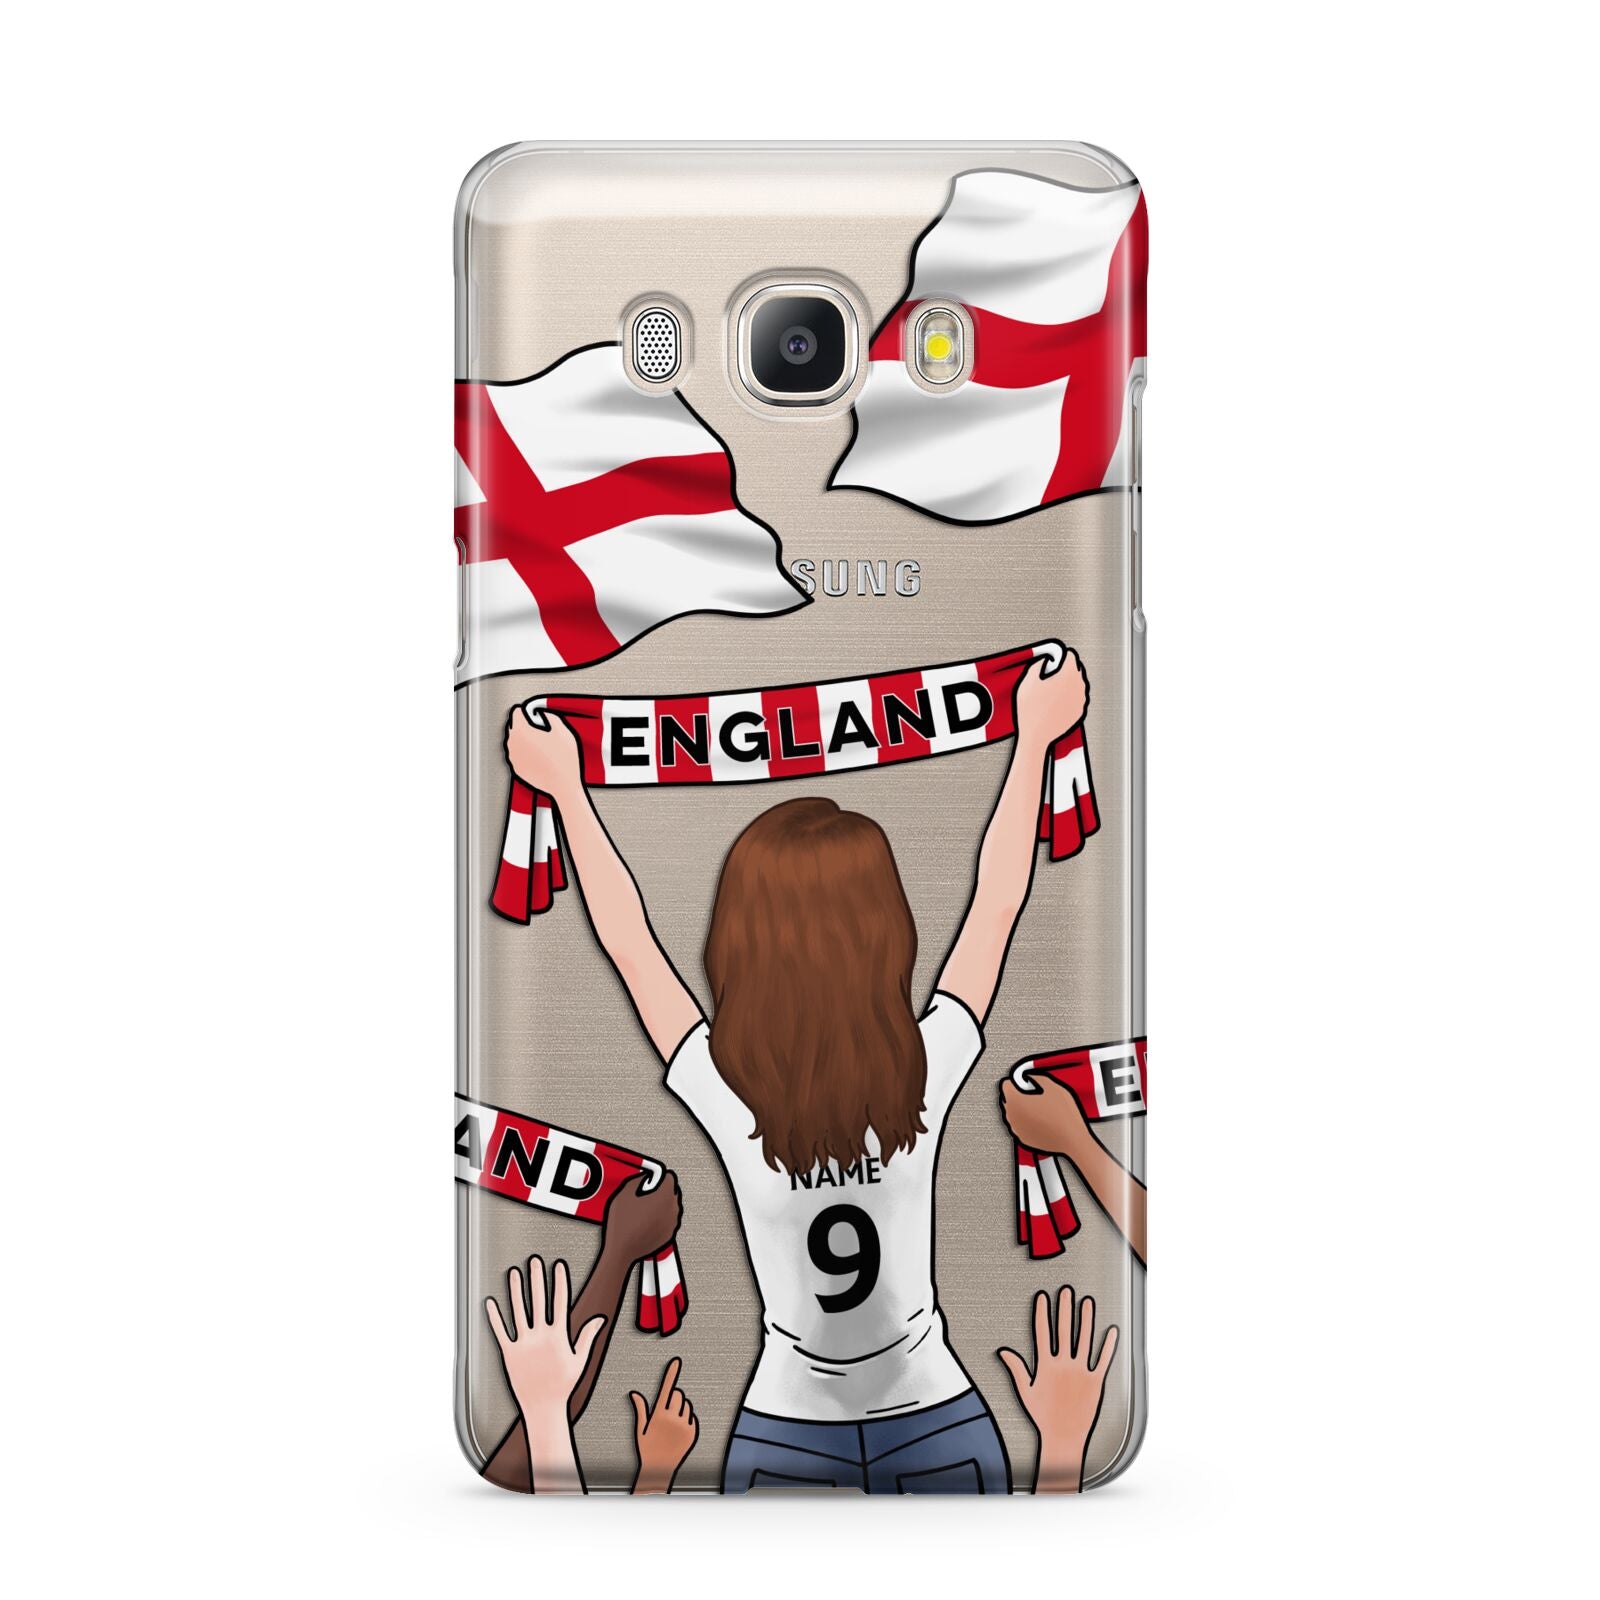 Football Supporter Personalised Samsung Galaxy J5 2016 Case